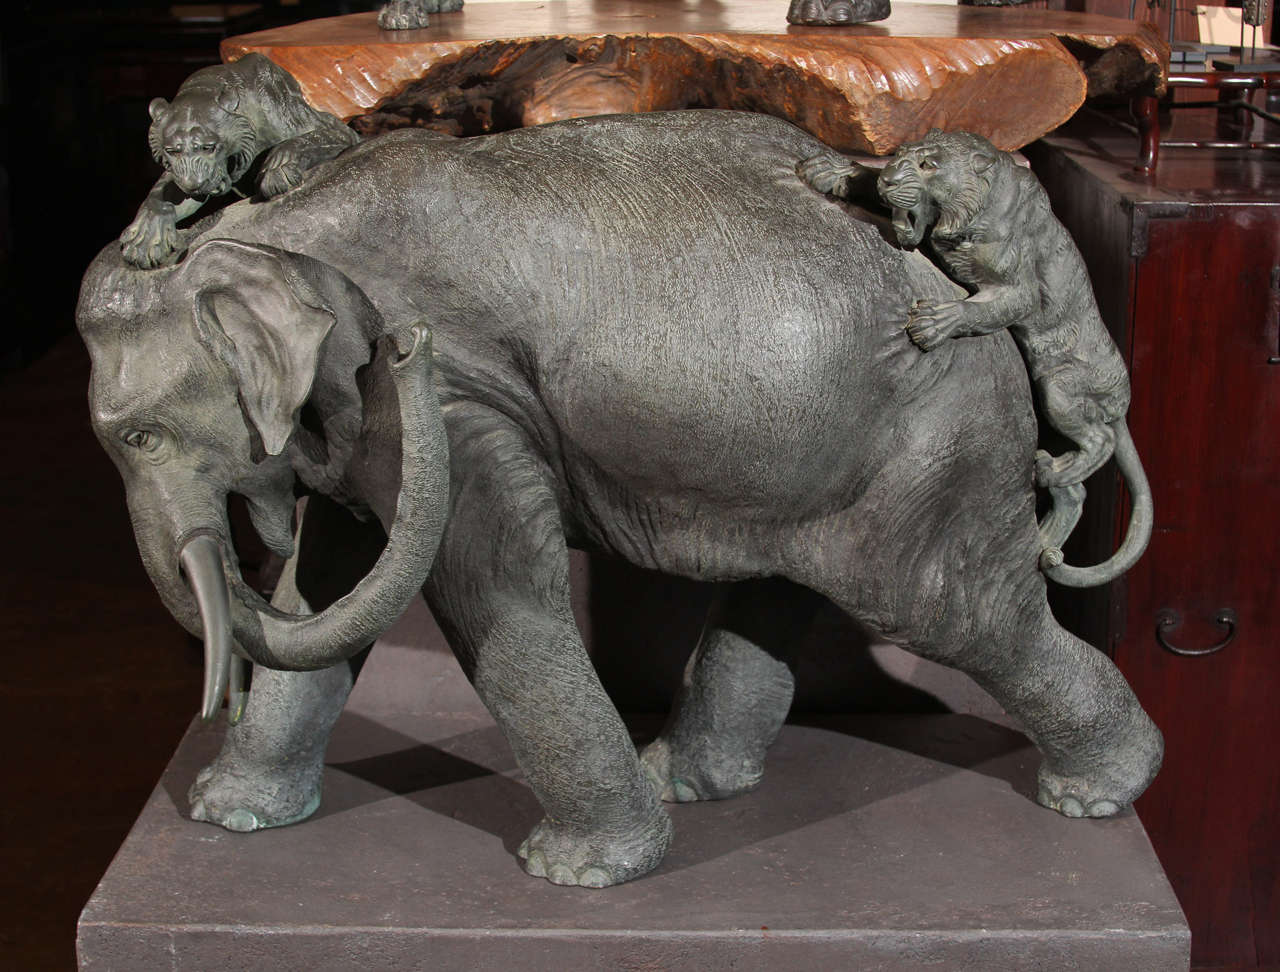 Massive Japanese Meiji-era sculpture of an elephant attacked by two tigers. 
Signed by Genryusai Seiya. 
Meiji Era.